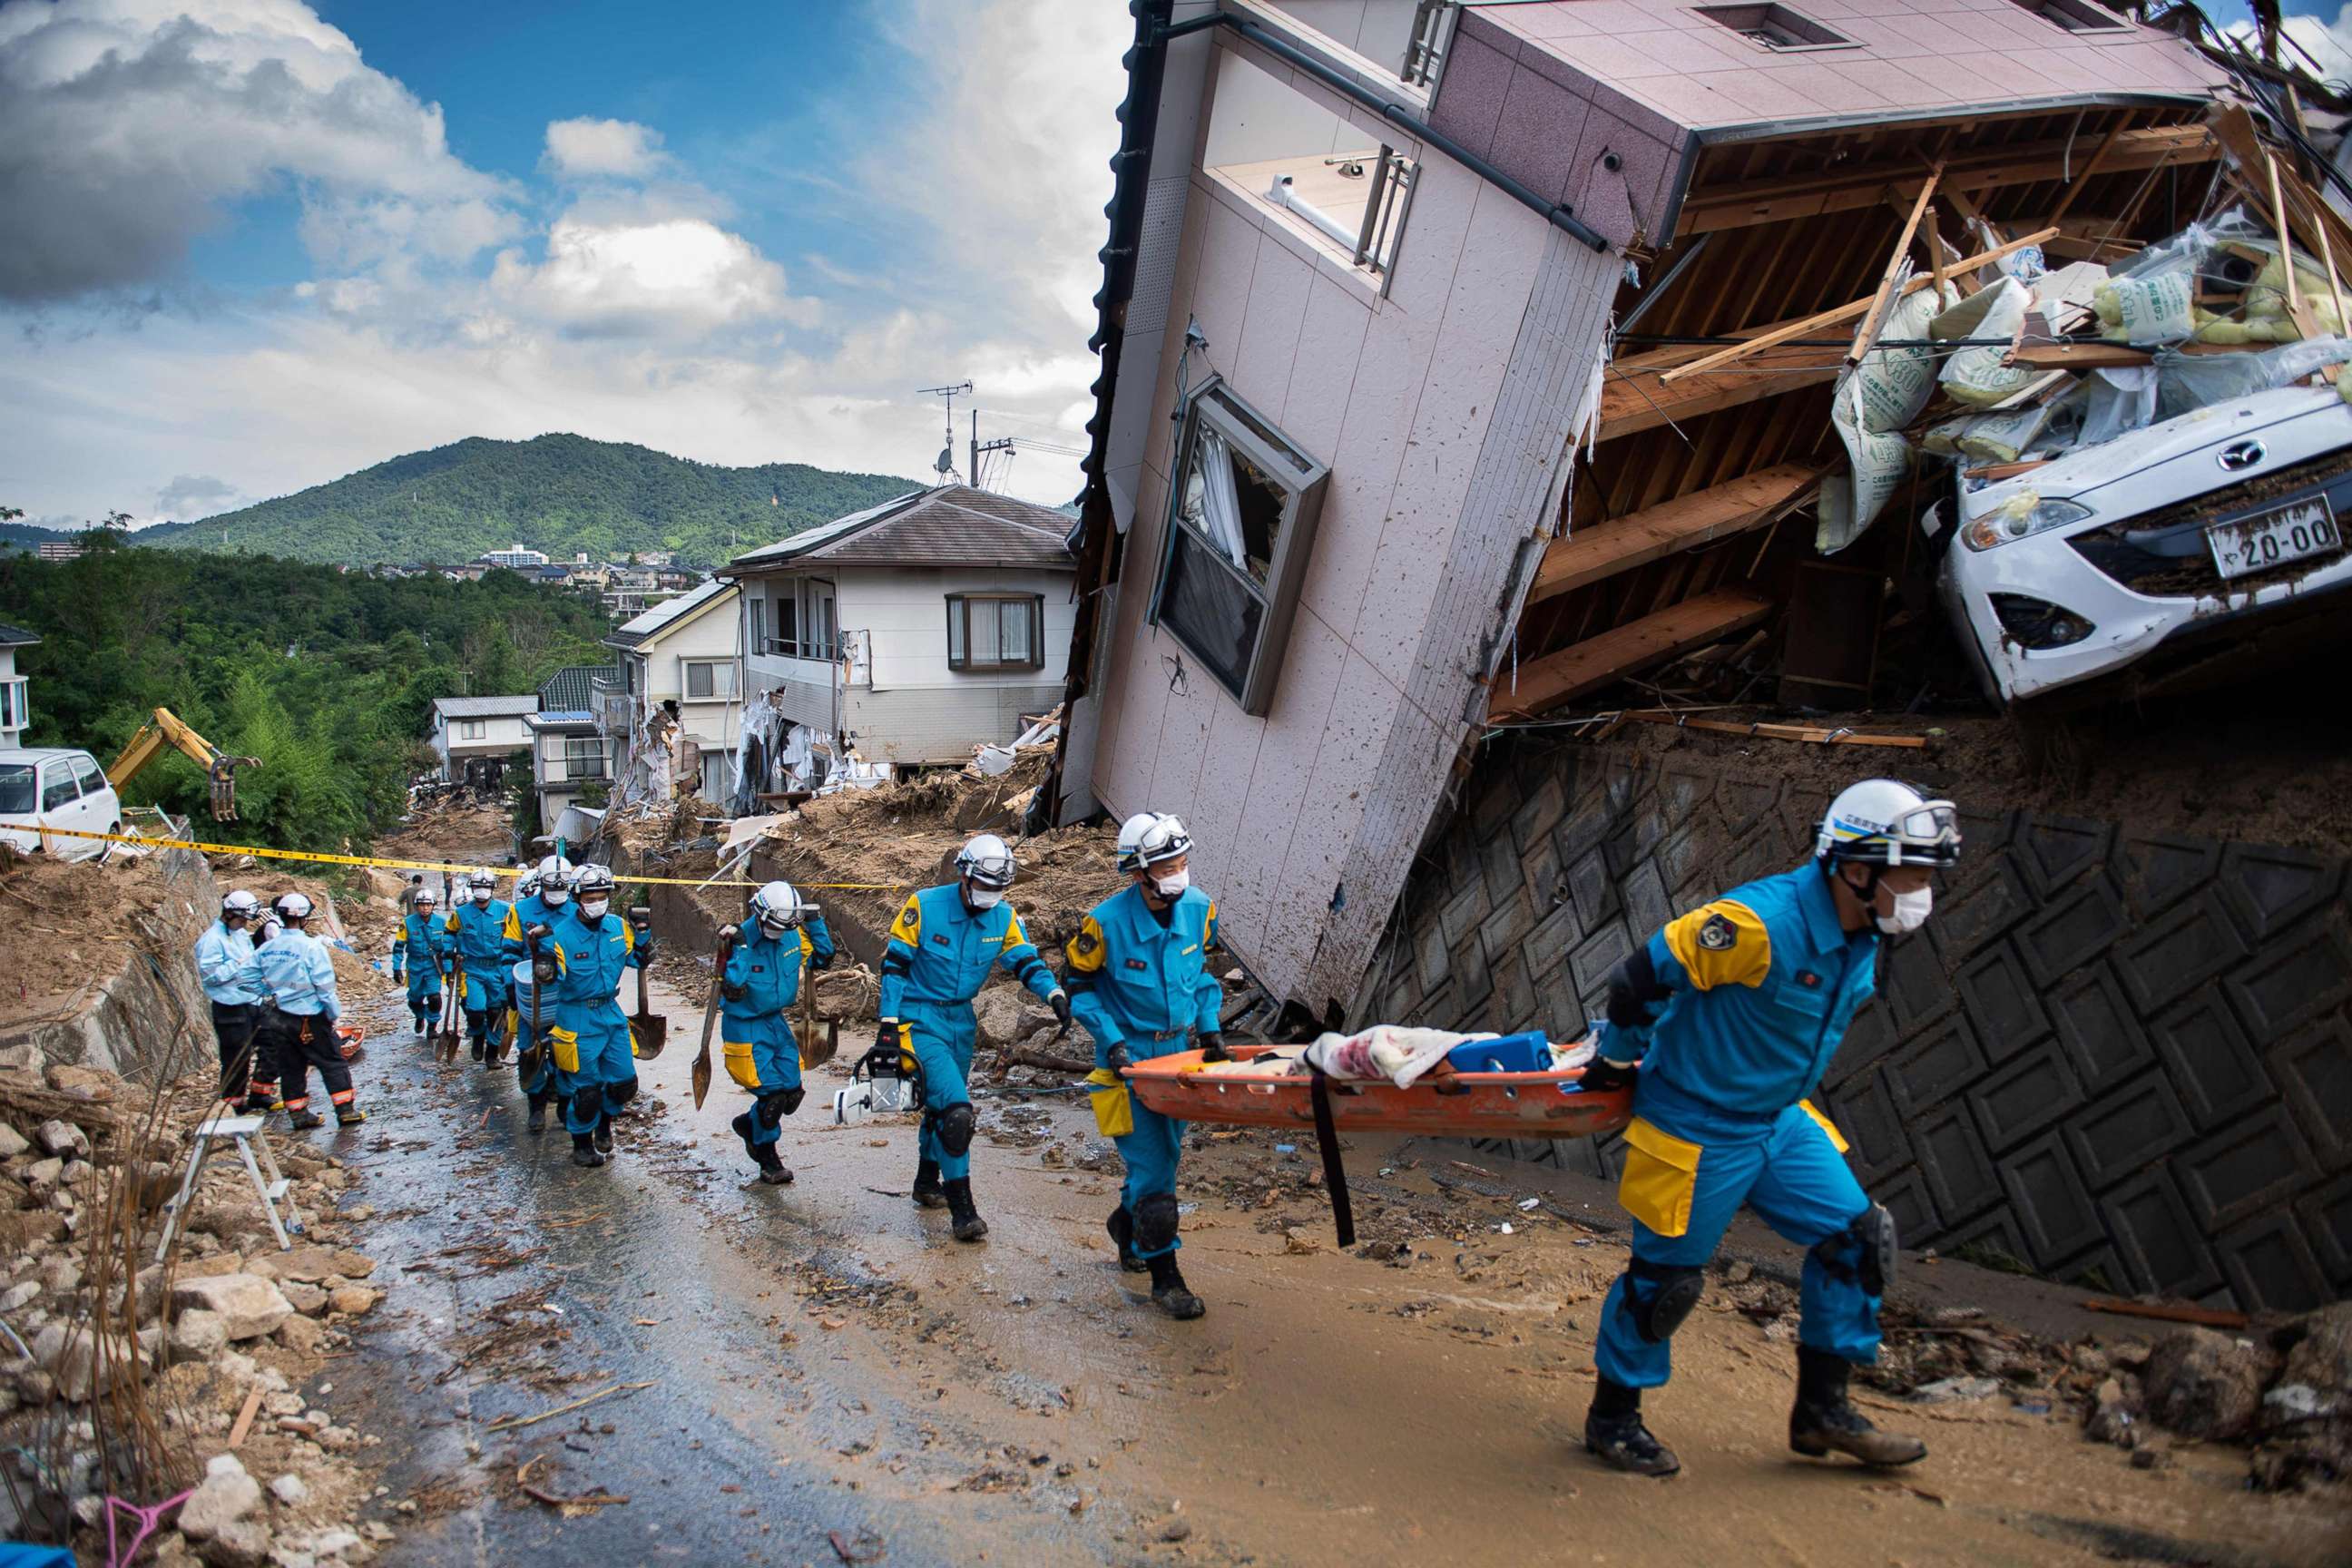 PHOTO: Police arrive to clear debris scattered on a street in a flood hit area in Kumano, Hiroshima prefecture on July 9, 2018.